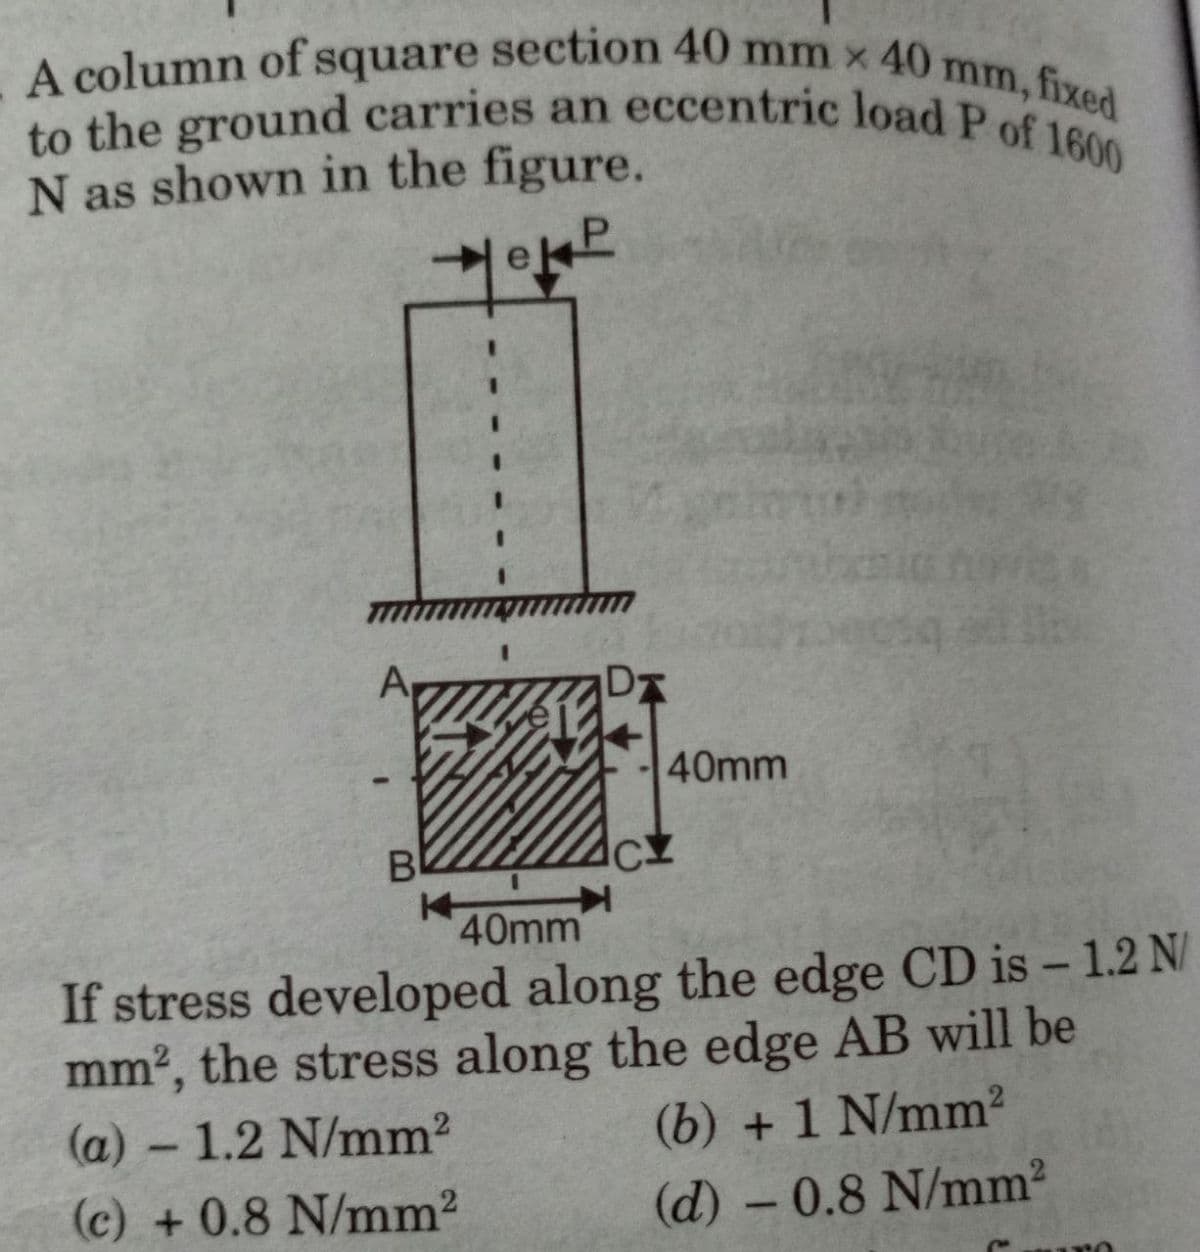 A column of square section 40 mm x 40m
to the ground carries an eccentric load P of 1600
mm, fixed
N as shown in the figure.
eP
40mm
B
40mm
If stress developed along the edge CD is -1.2 N/
mm², the stress along the edge AB will be
(a) - 1.2 N/mm²
(b) + 1 N/mm²
(c) + 0.8 N/mm²
(d) - 0.8 N/mm²
Cro